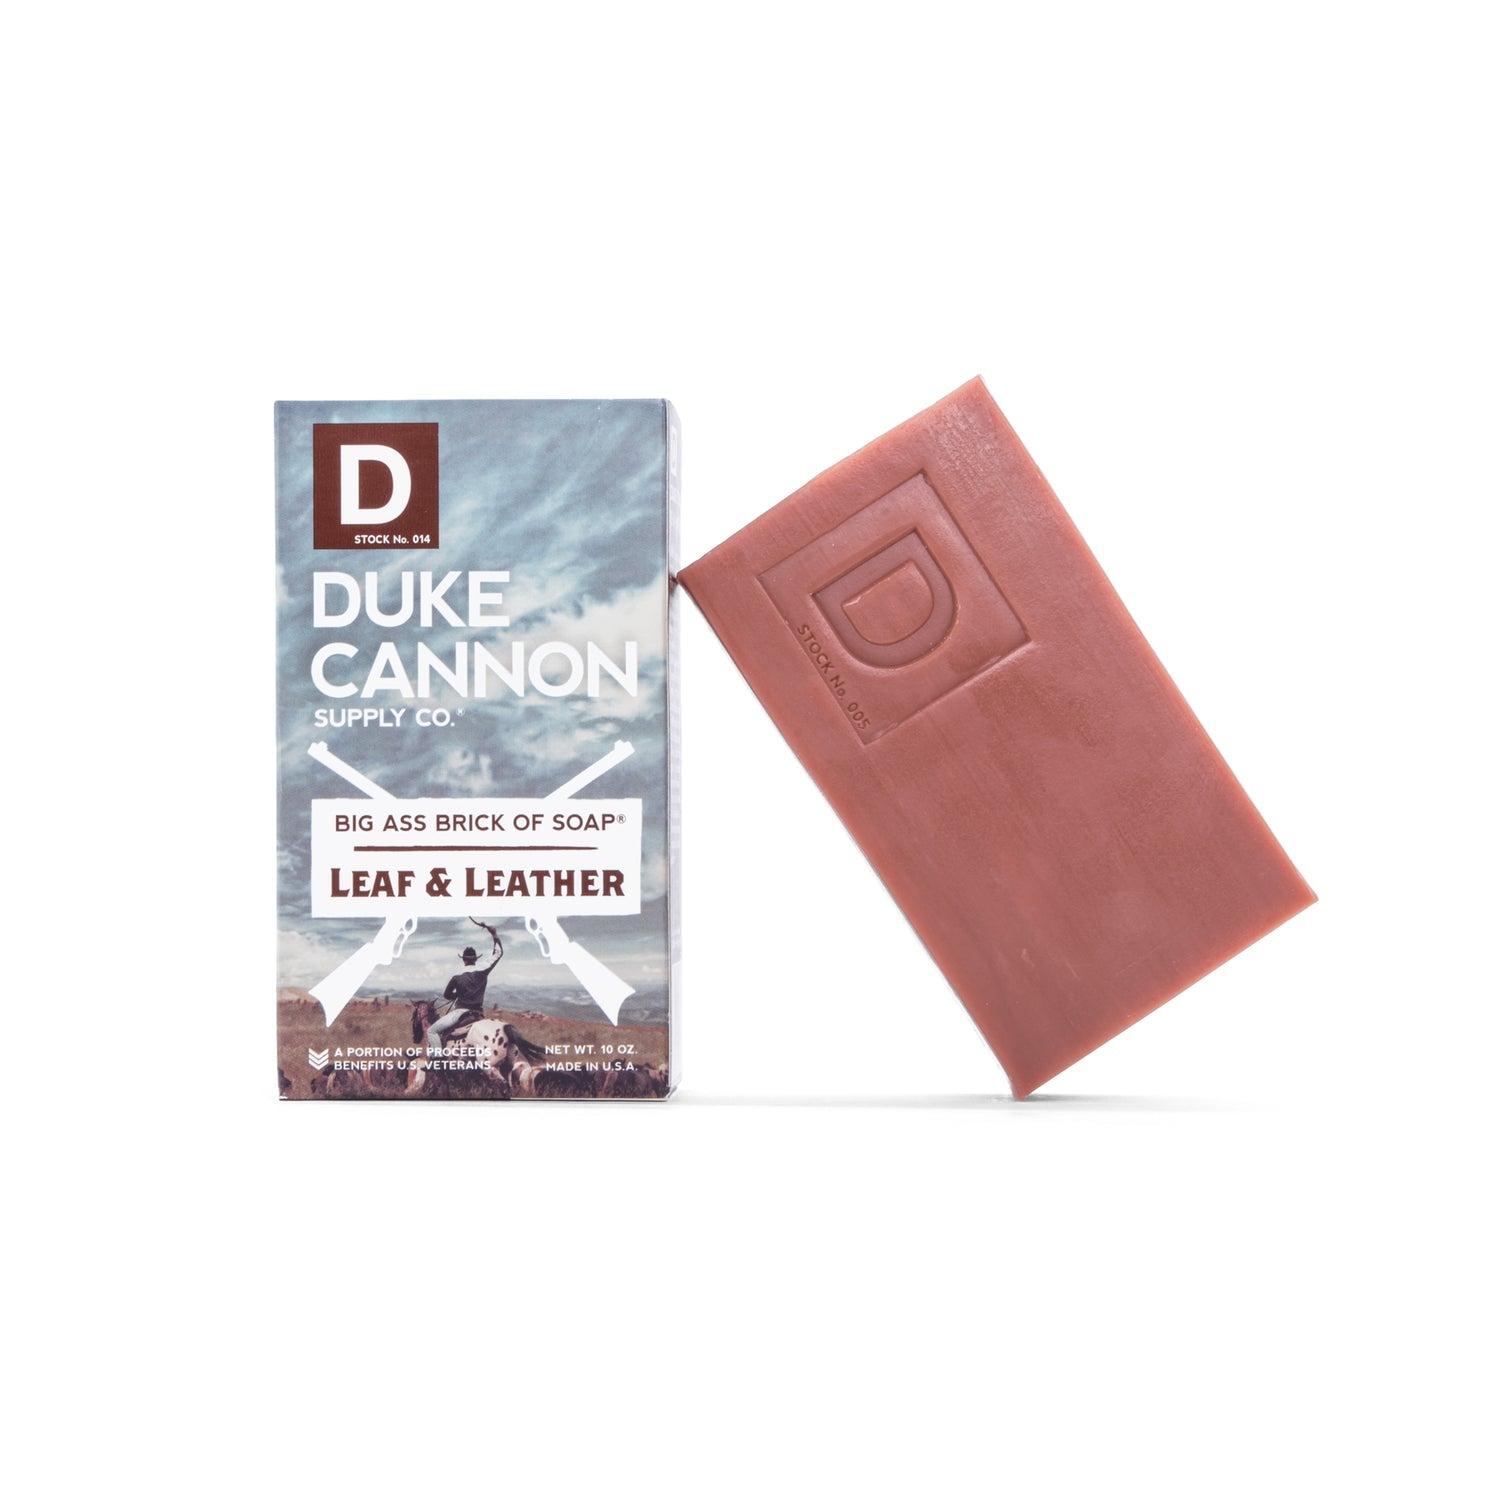 Duke Cannon Big Ass Brick Of Soap - Leaf and Leather available at The Good Life Boutique